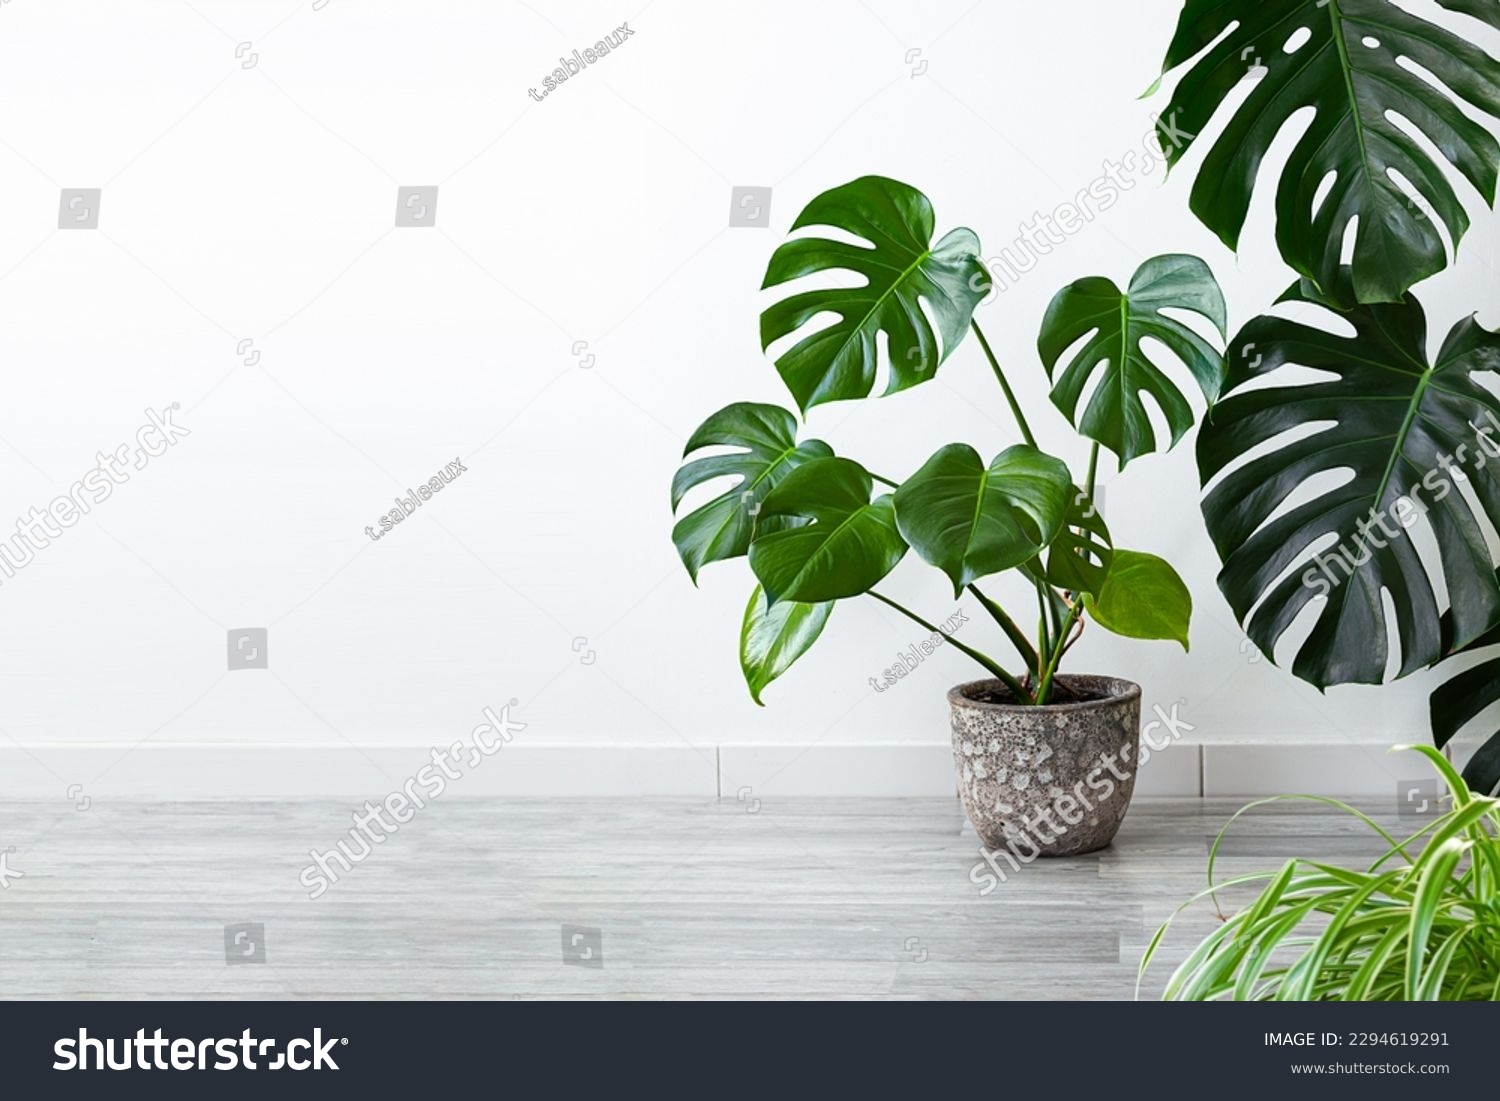 Monstera deliciosa or Swiss Cheese Plant in a pot on a gray floor, home gardening and connecting with nature concept with copy space #2294619291